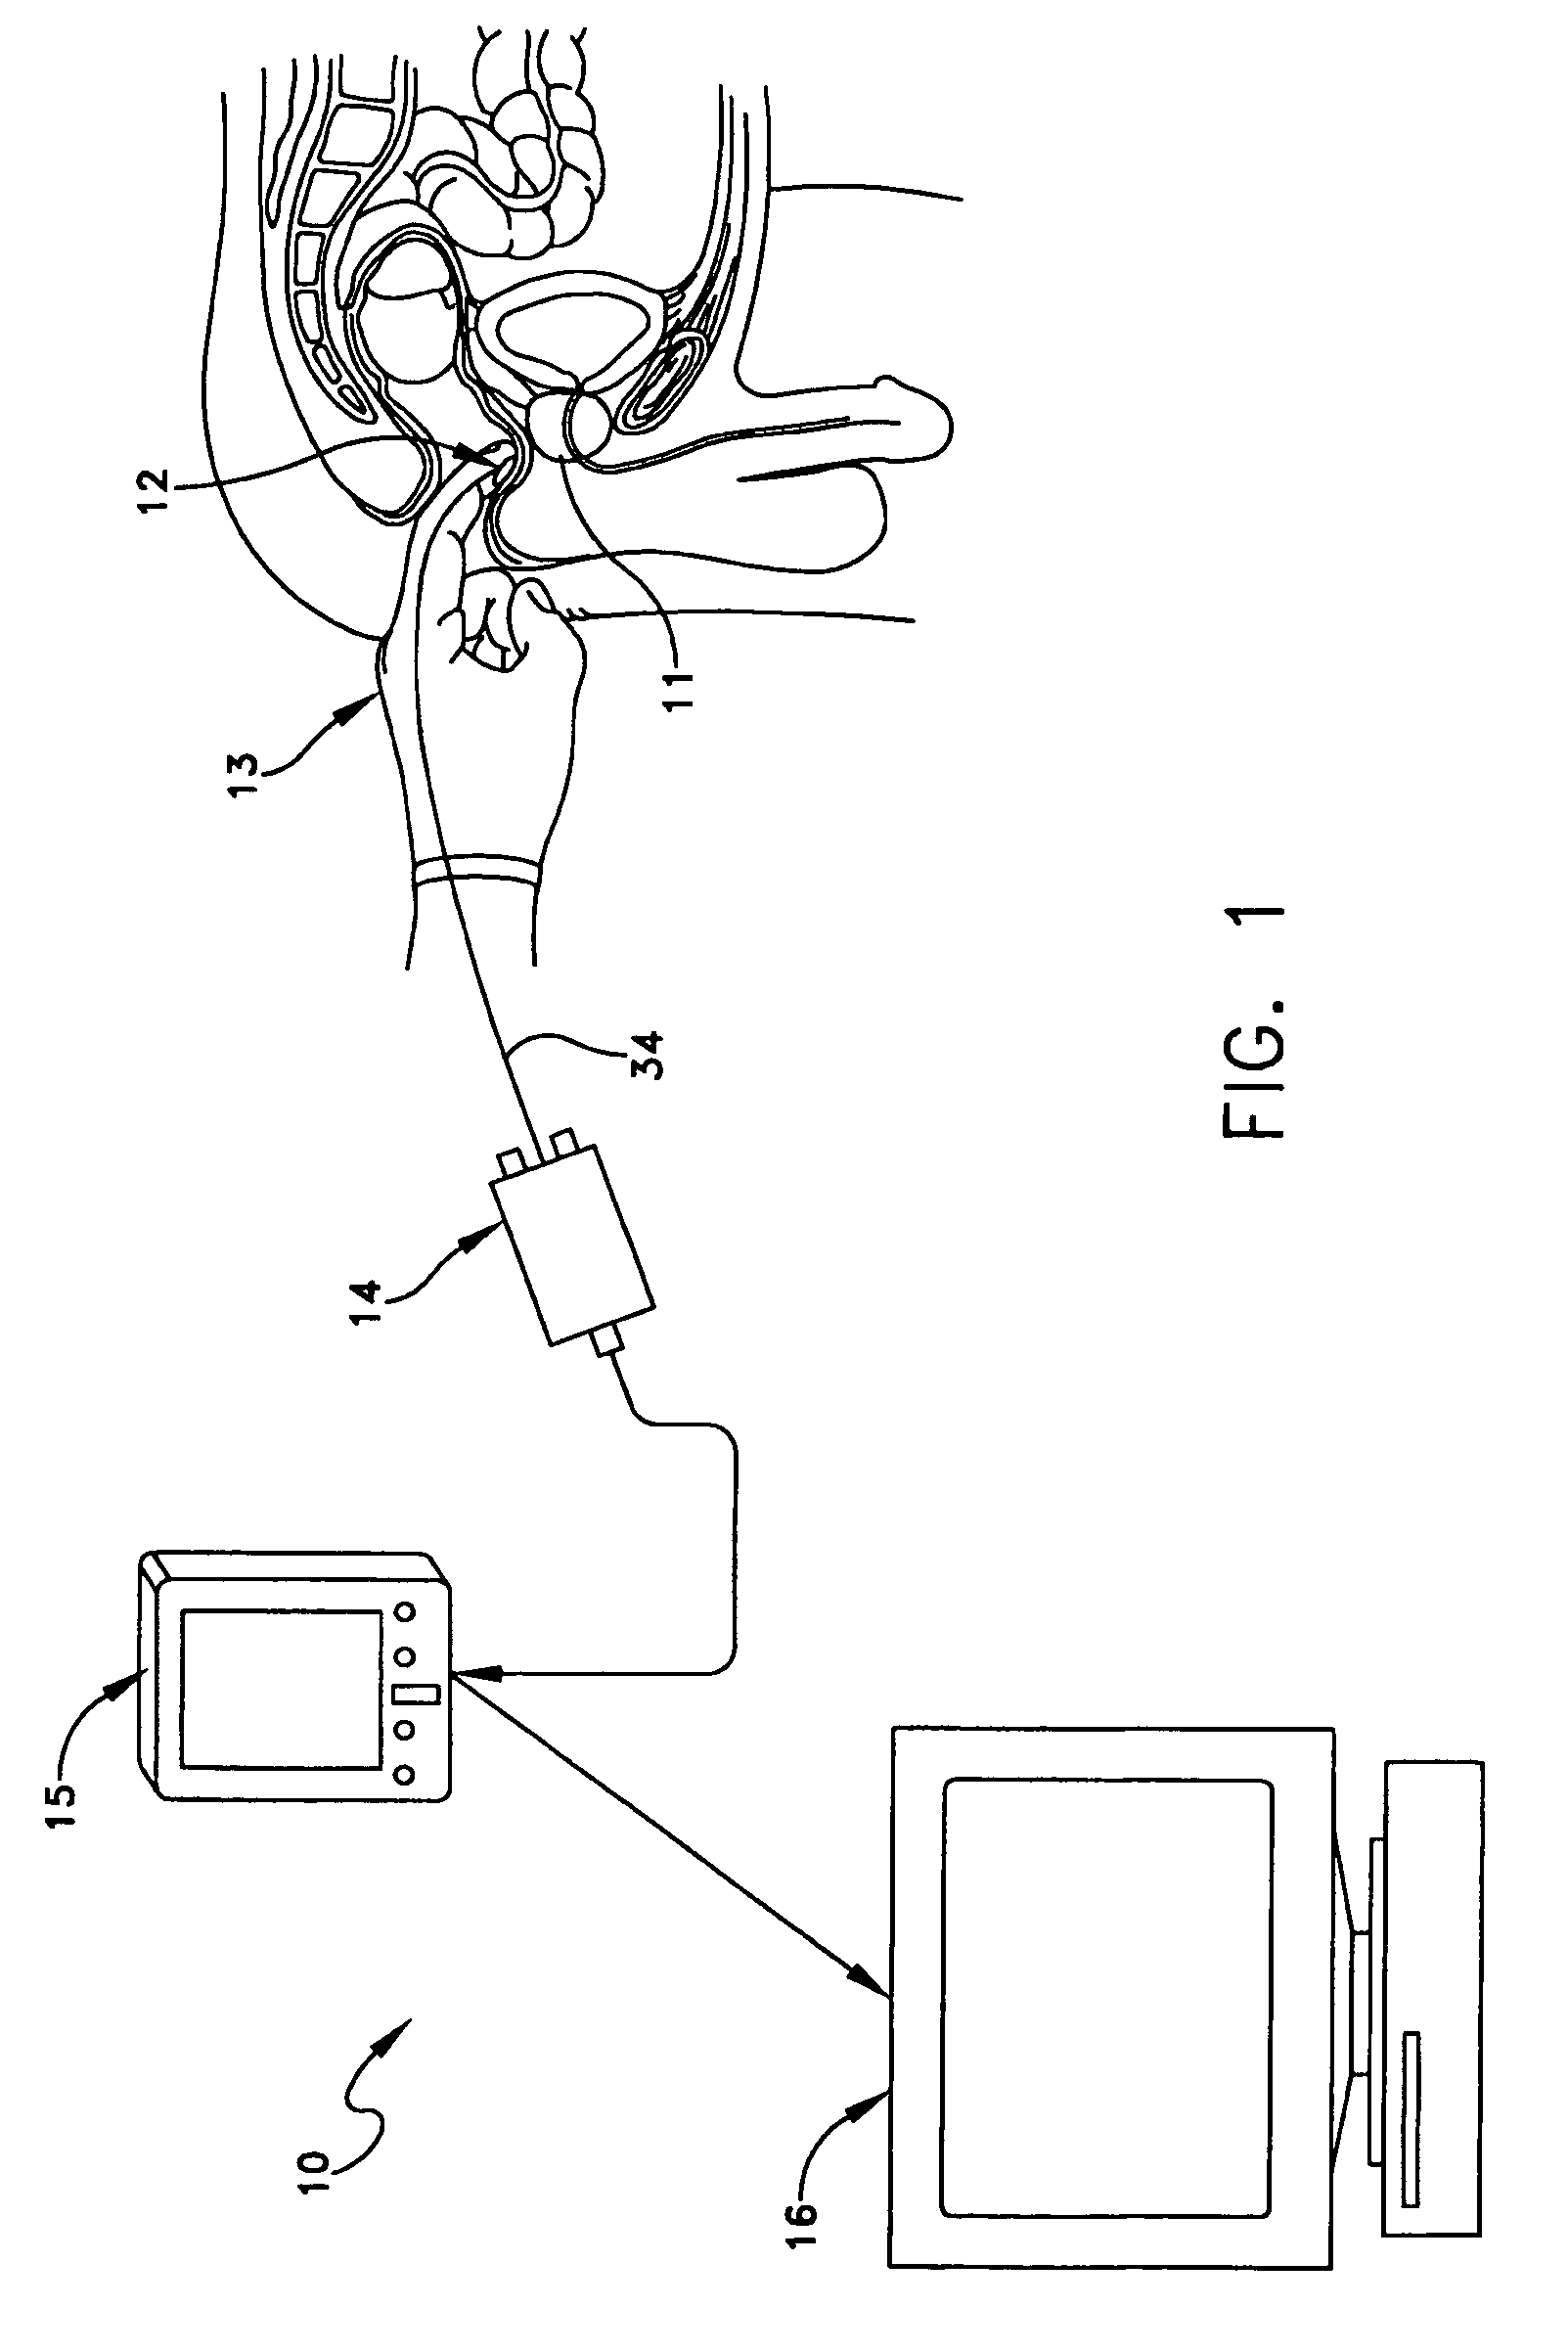 Apparatus and method for measuring the dimensions of the palpable surface of the prostate